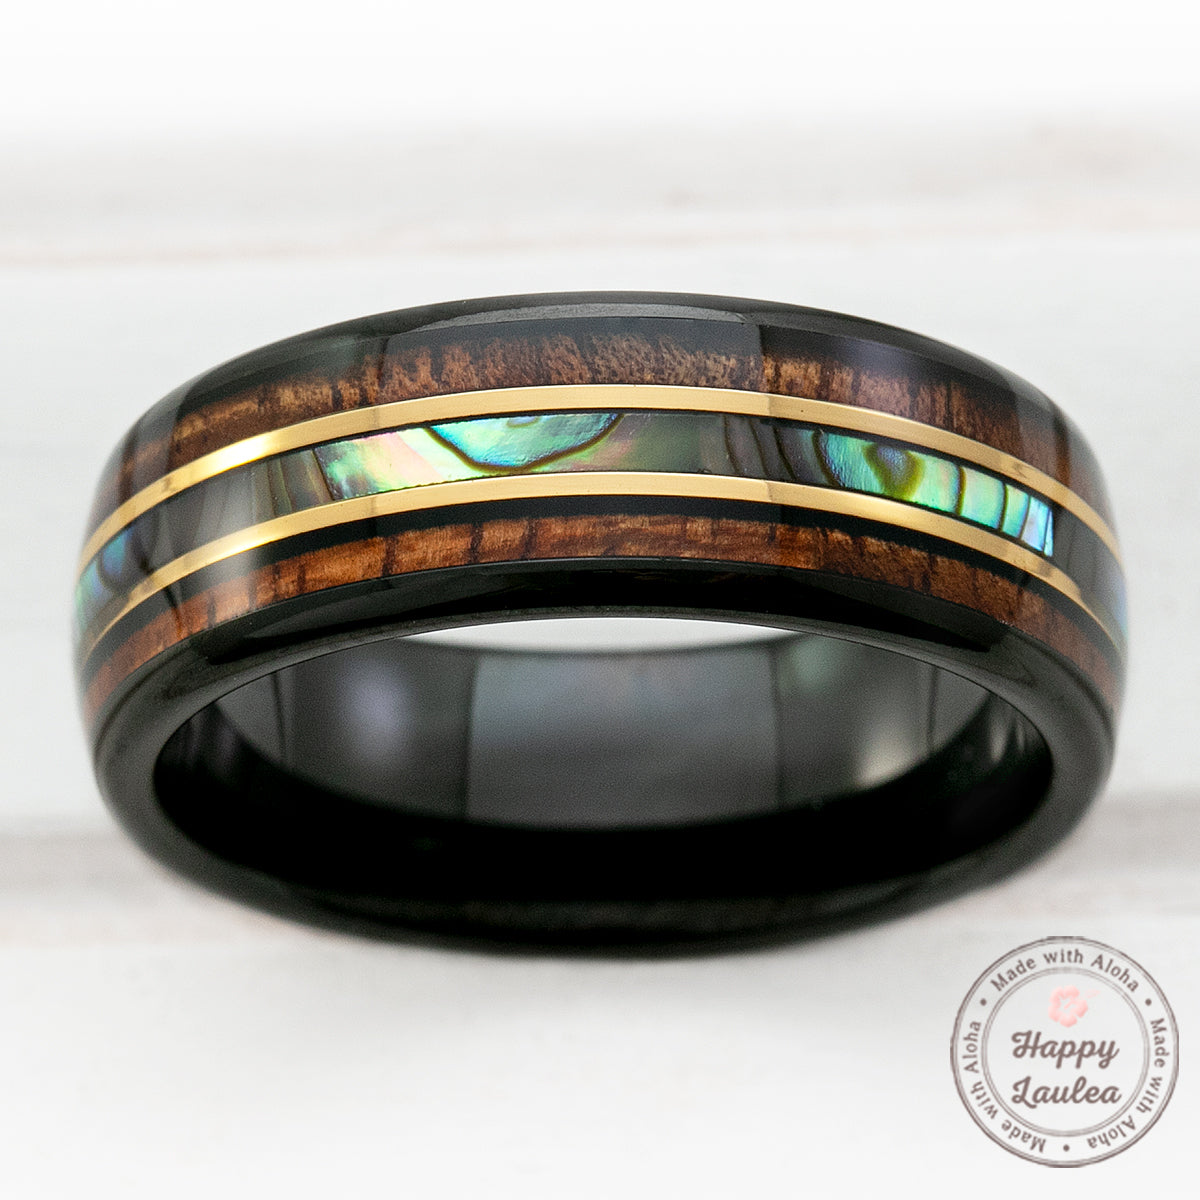 Black Tungsten with Gold Strip Ring with Abalone Shell & Hawaiian Koa Wood Tri-Inlay - 8mm, Dome Shape, Comfort Fitment